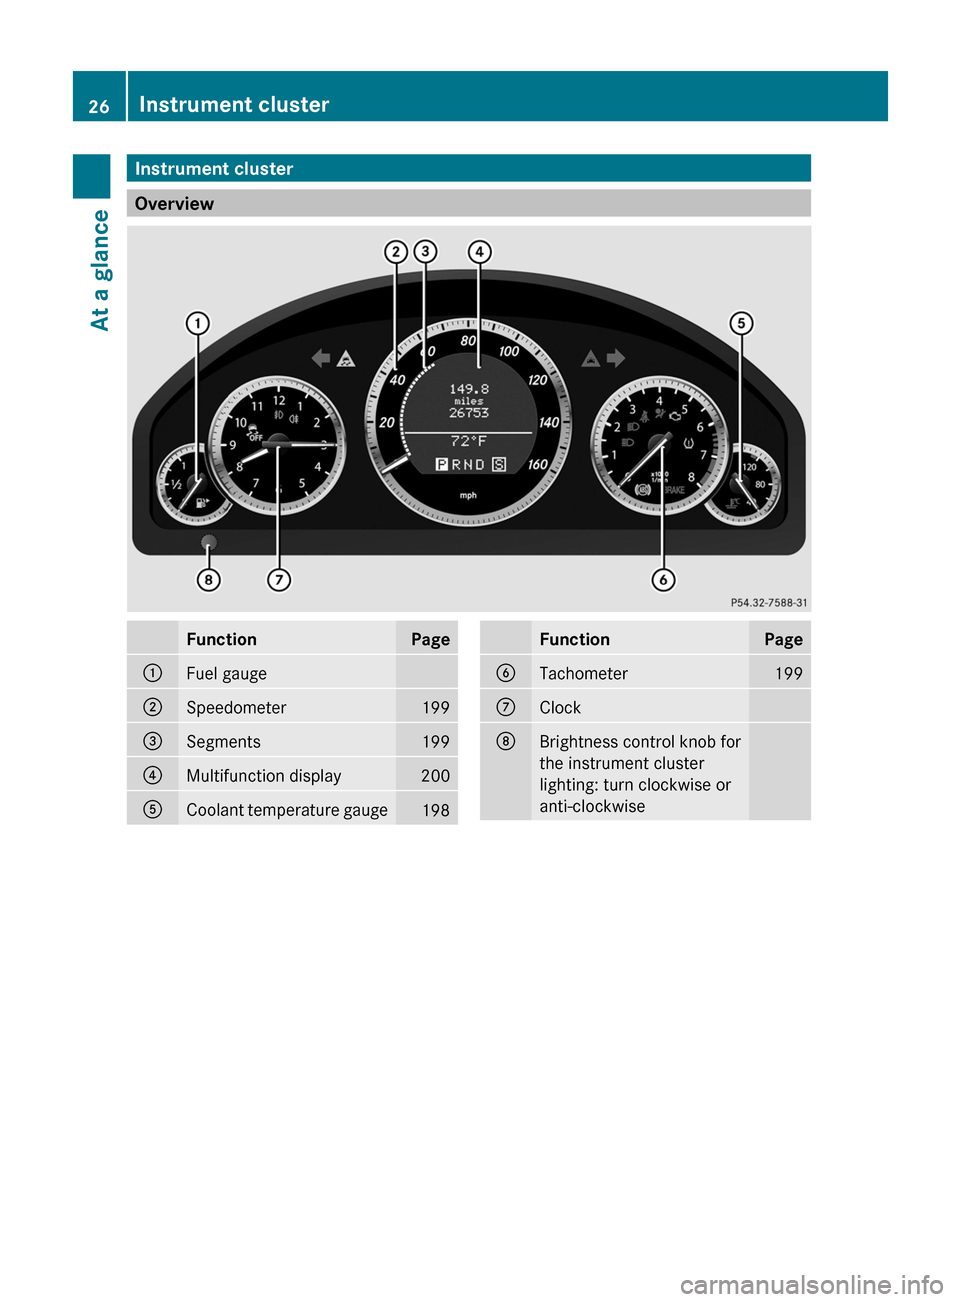 MERCEDES-BENZ E-Class COUPE 2011 C207 Owners Manual Instrument cluster
Overview
FunctionPage:Fuel gauge;Speedometer199=Segments199?Multifunction display200ACoolant temperature gauge198FunctionPageBTachometer199CClockDBrightness control knob for
the ins